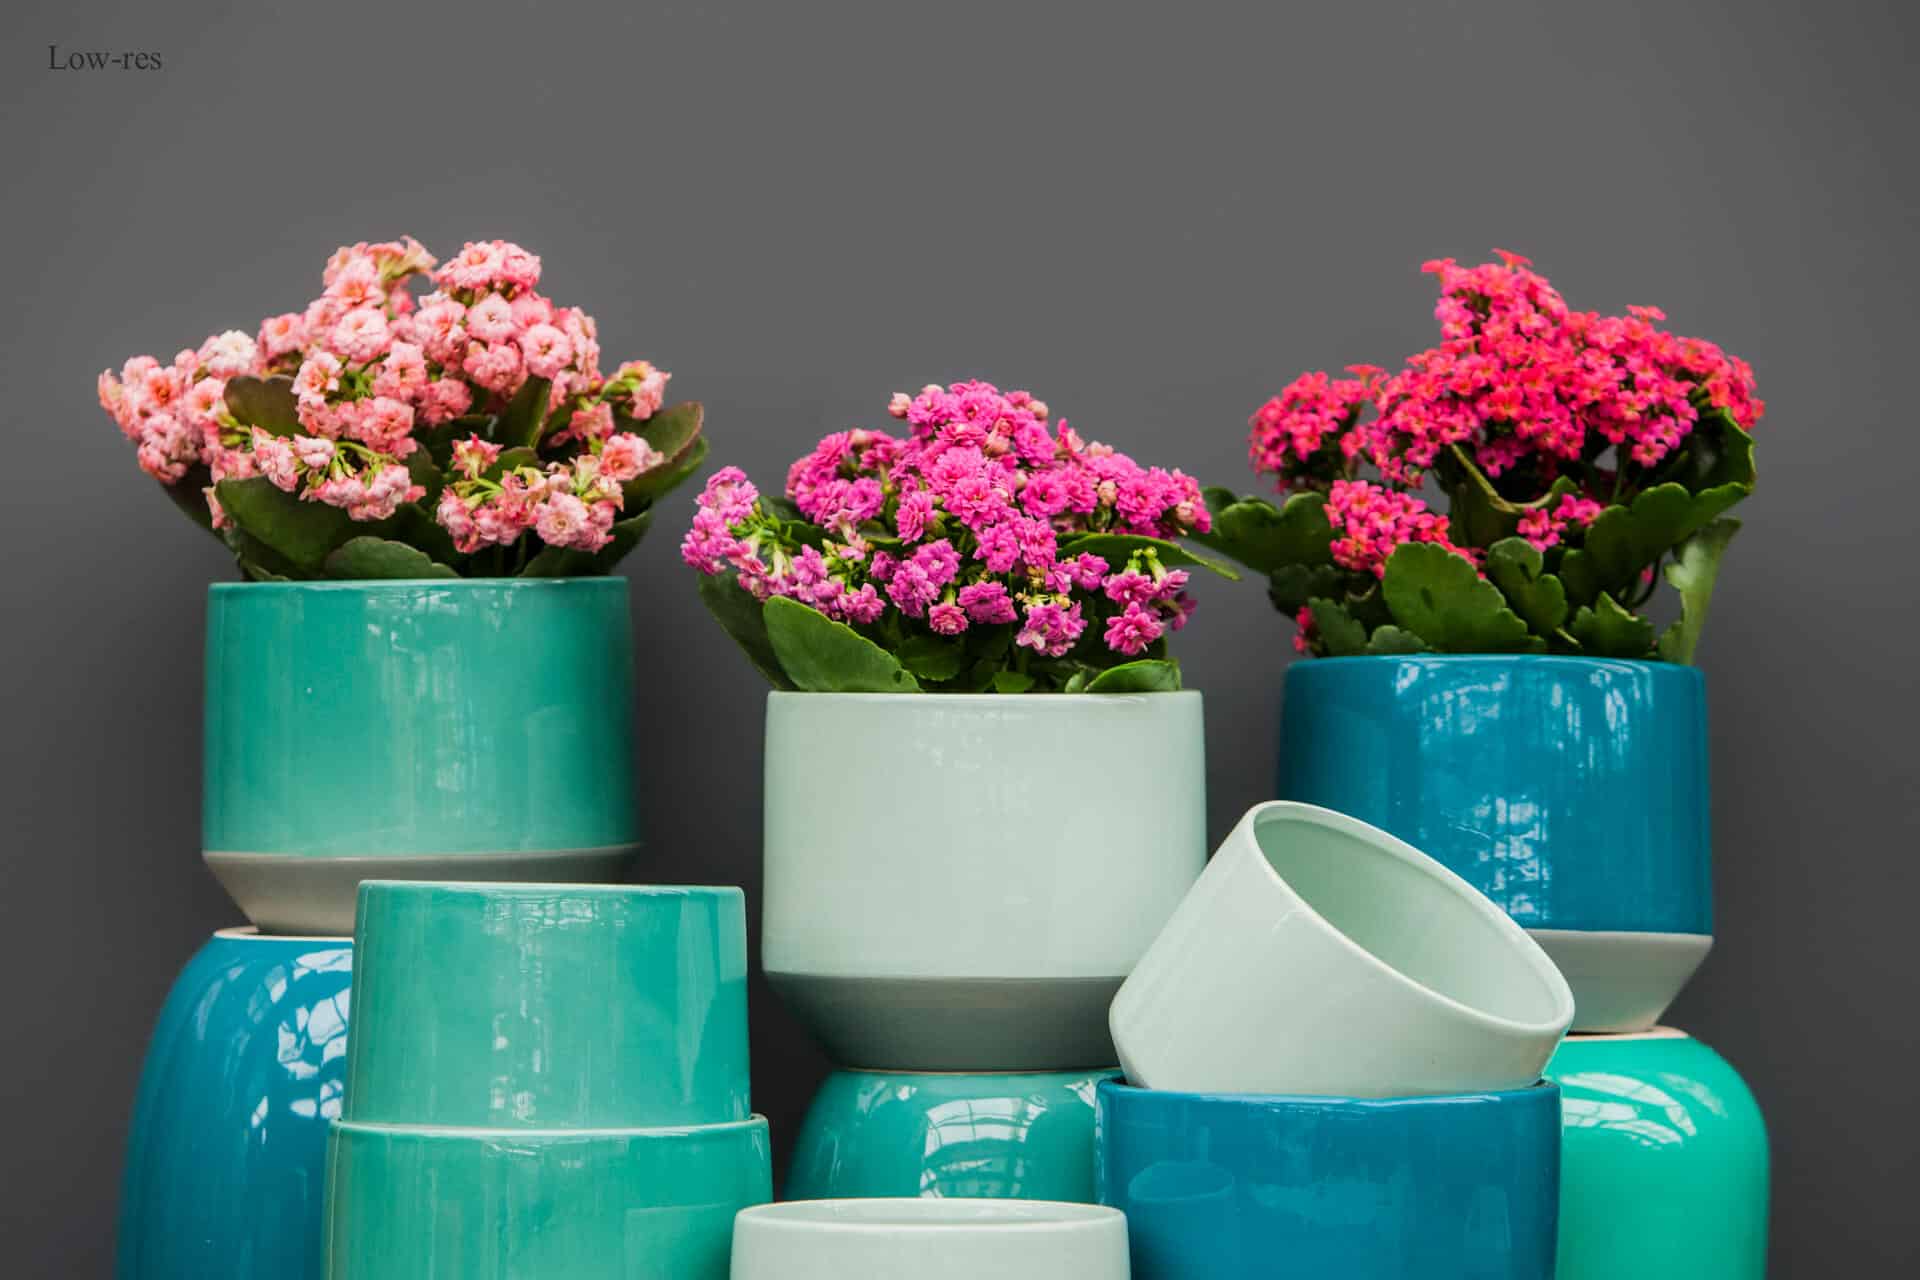 Ceramic pots in shades of blue containing pink kalanchoe flowering plants.